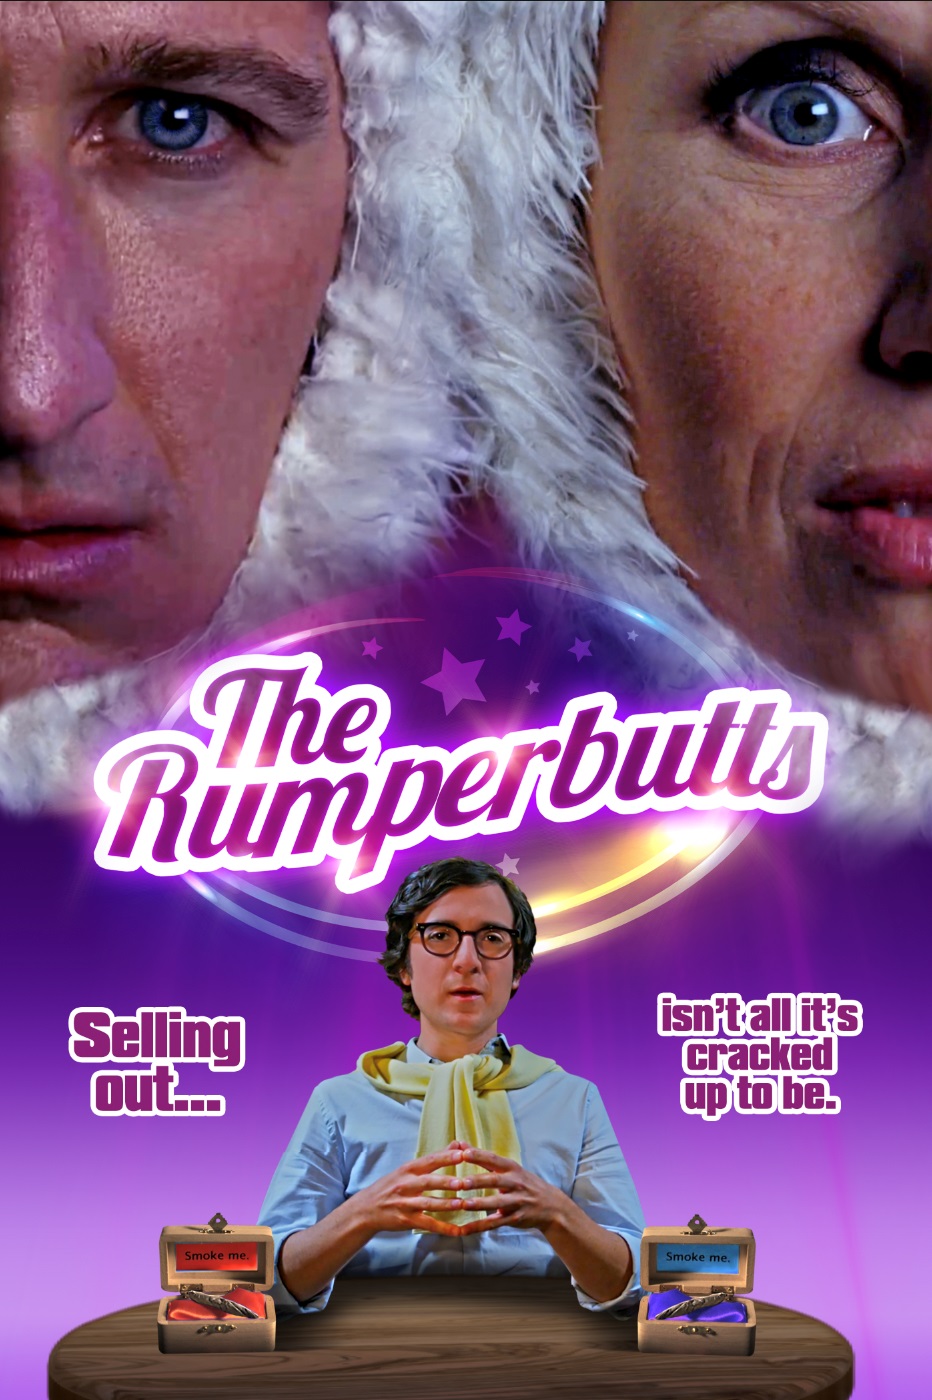 The Rumperbutts movie review